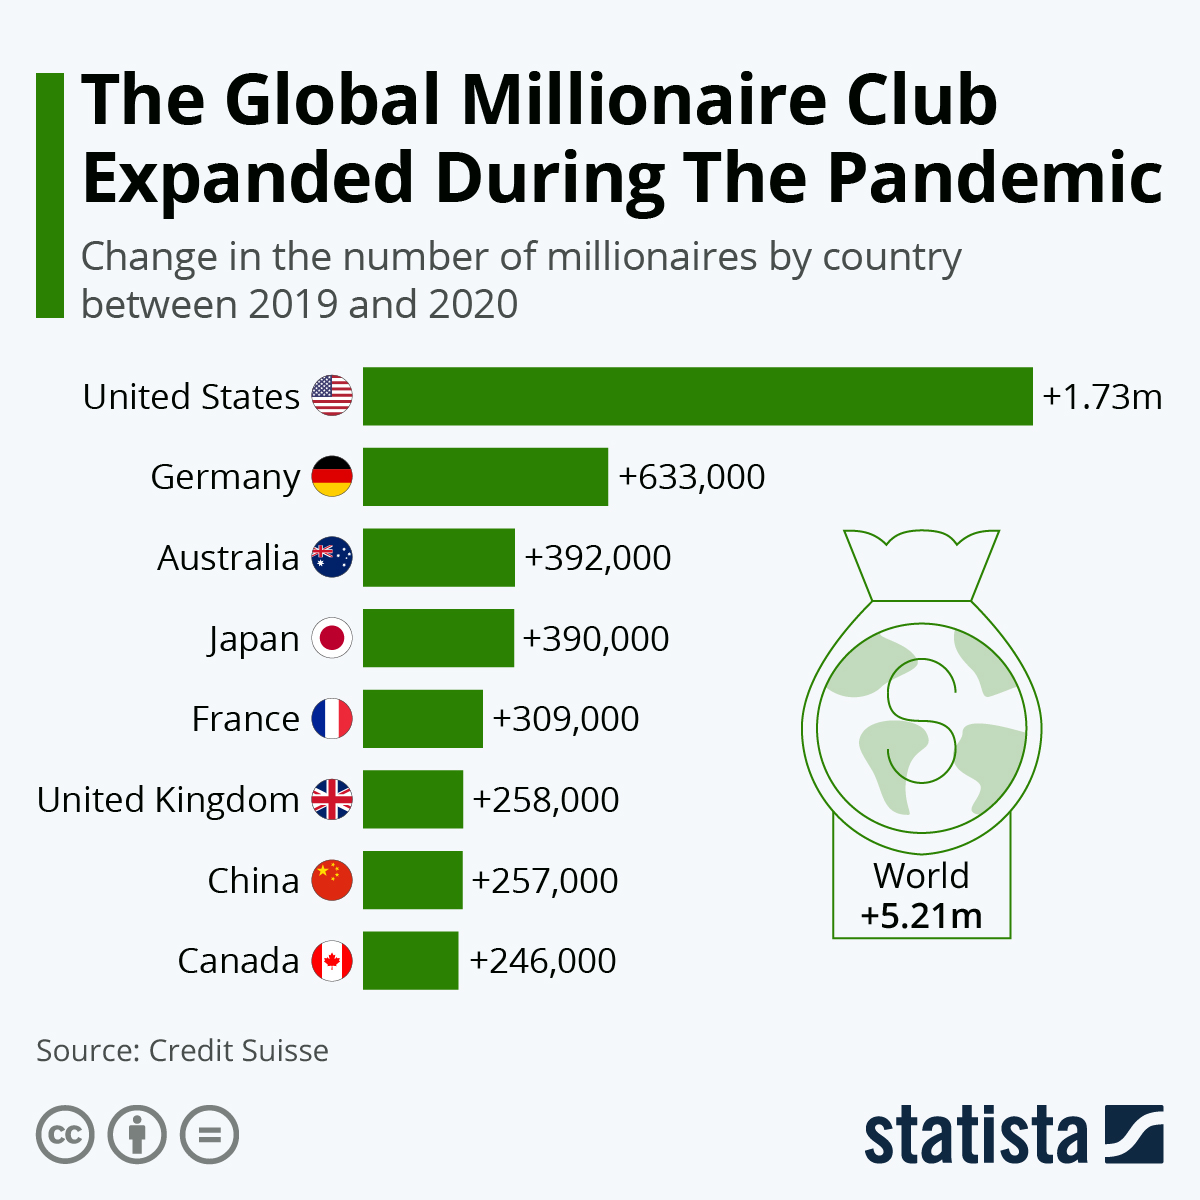 The Global Millionaire Club Expanded During The Pandemic